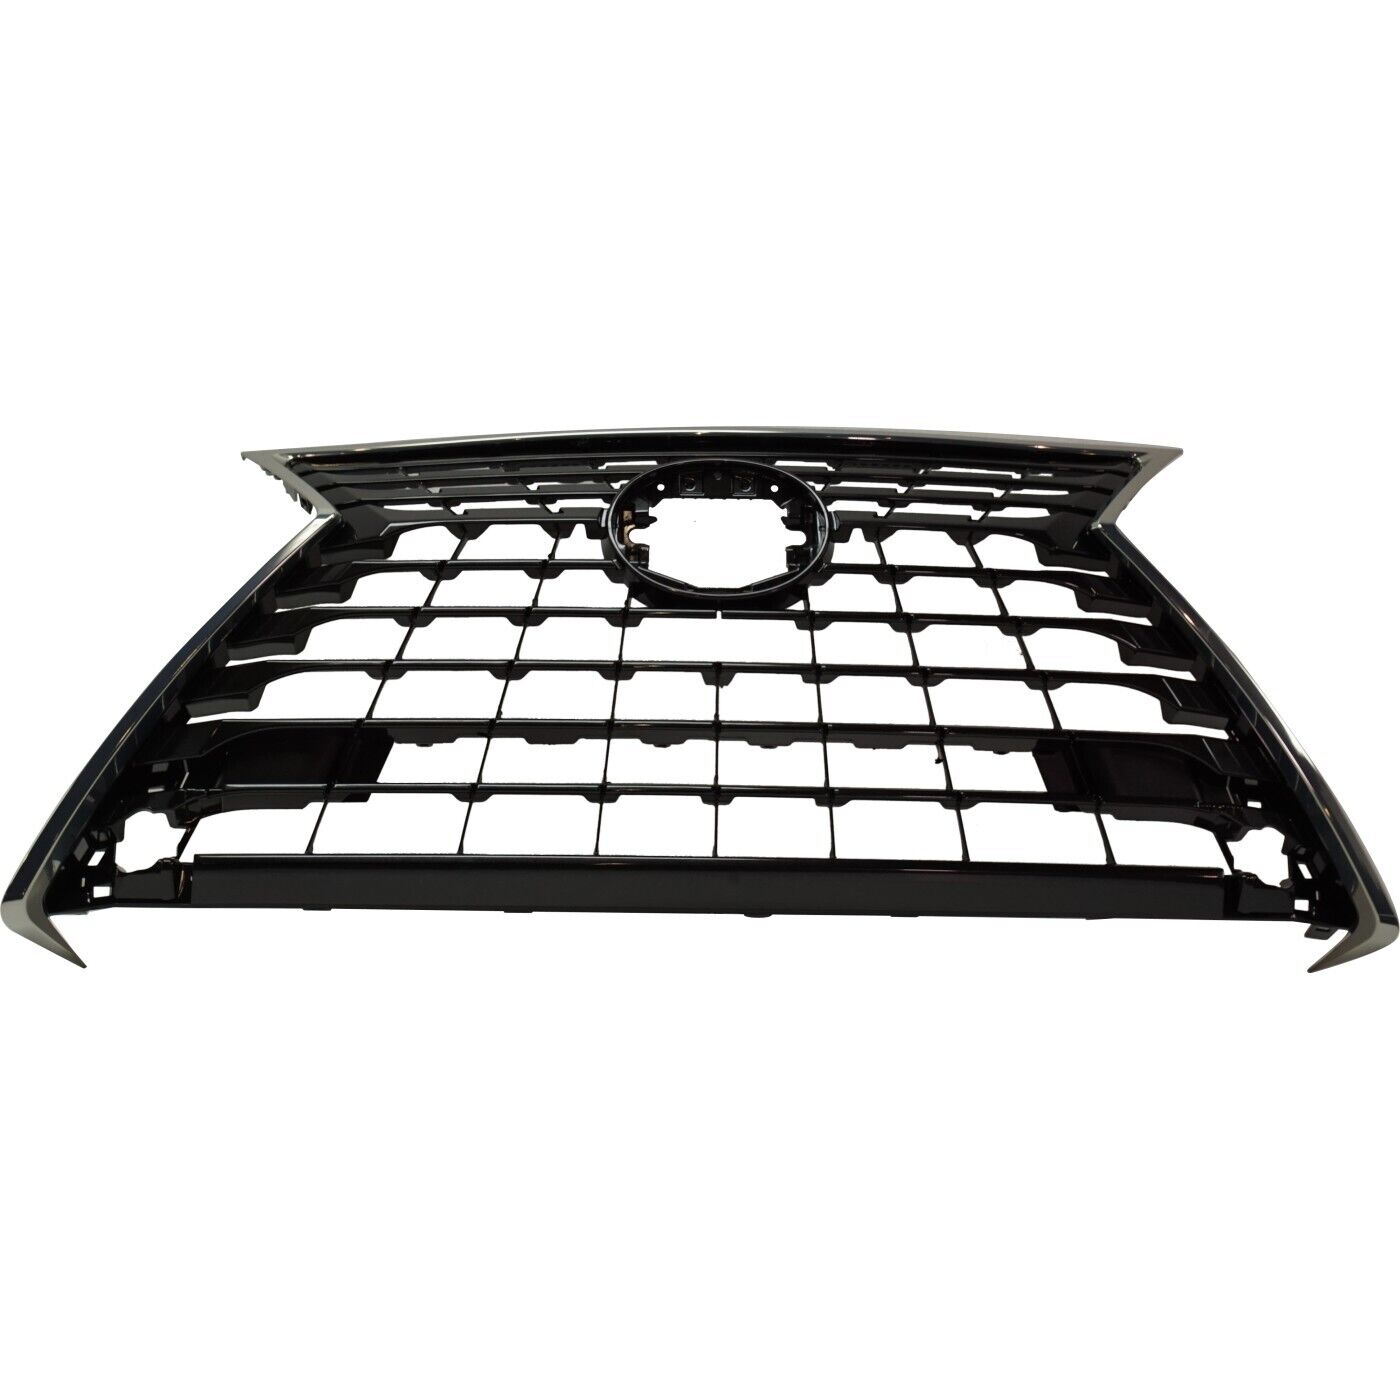 Grille Grill 5310178180 for Lexus NX300h NX300 2018-2019